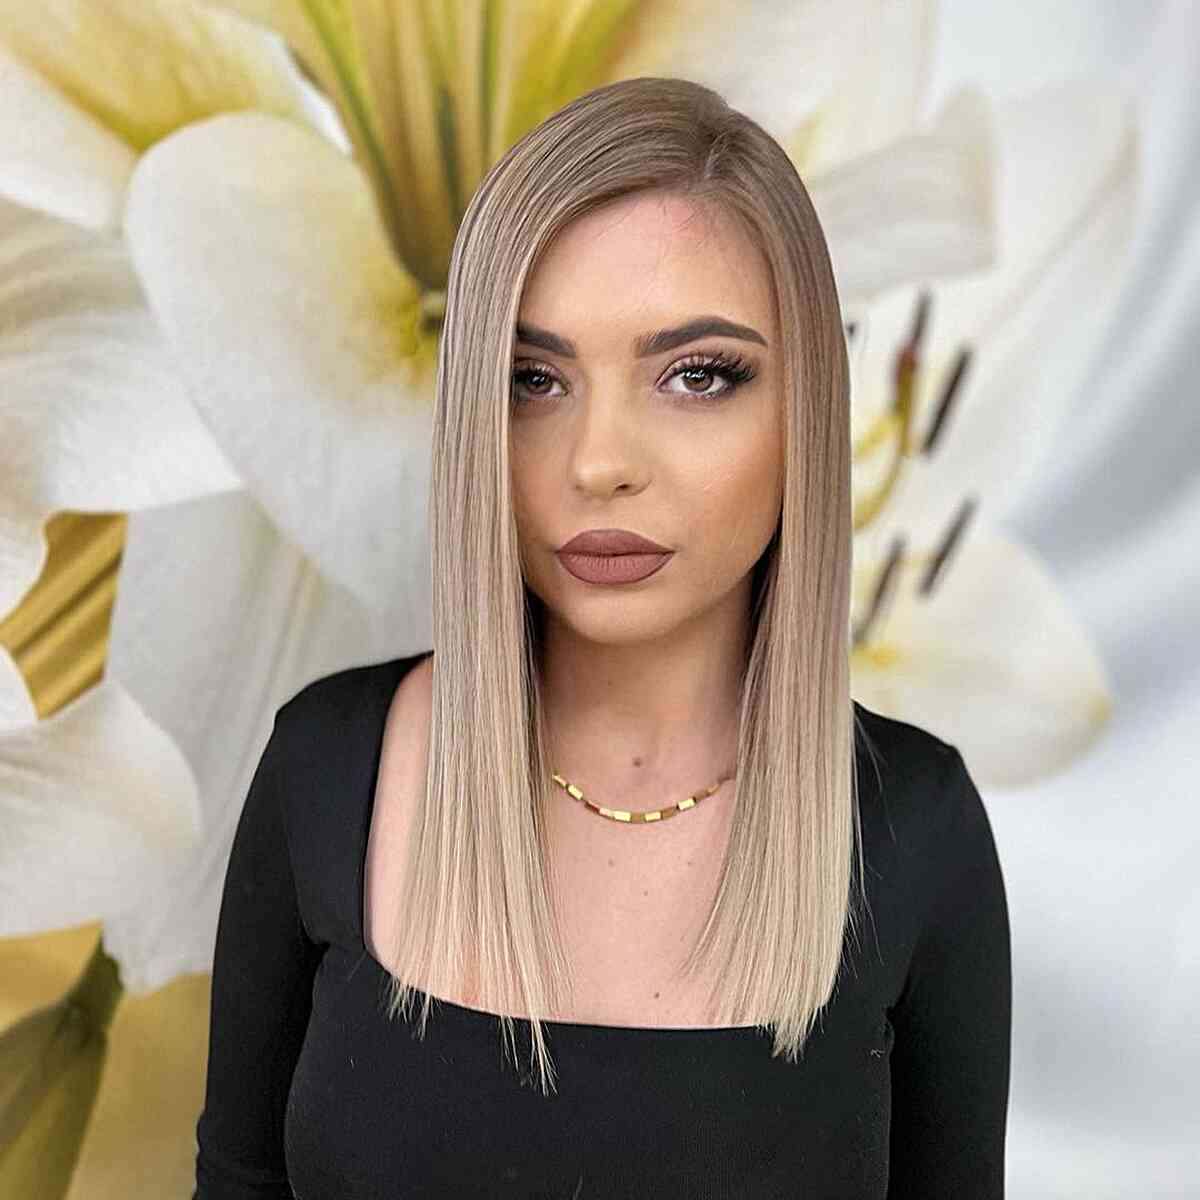 Medium-Length Sleek Fine Hair with a Side Part for women with blunt ends